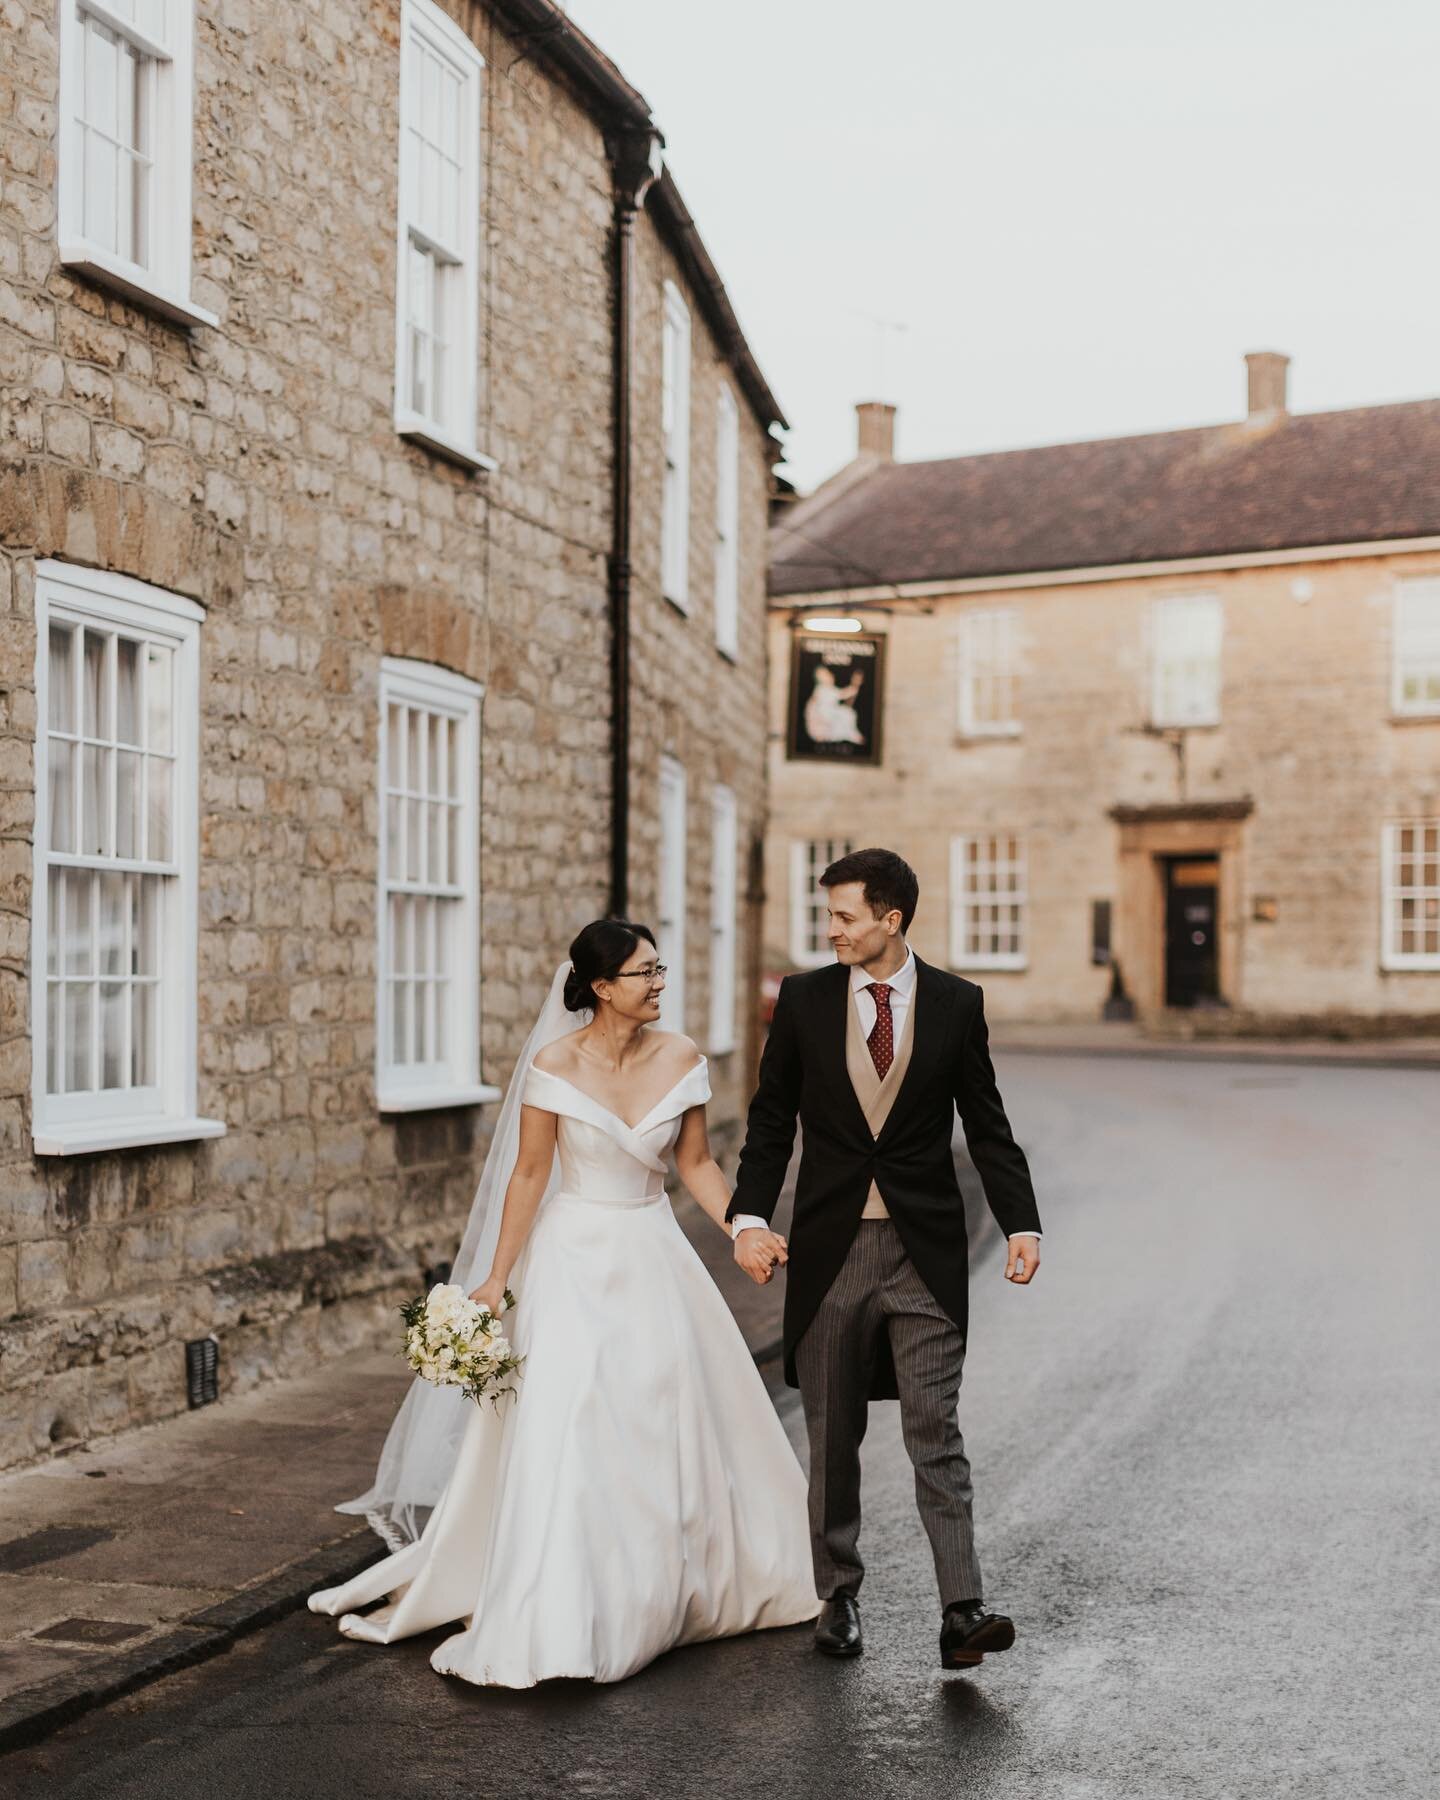 Happy one week to Yvonne and Chris who tied the knot at the stunning Sherborne abbey. What a beautiful winter wedding! ✨

Planner @oliveskyevents 
Flowers @artistically_twisted_london 
Dress @suzanneneville / @helenrodriguesbridal 
Hair and Make up @